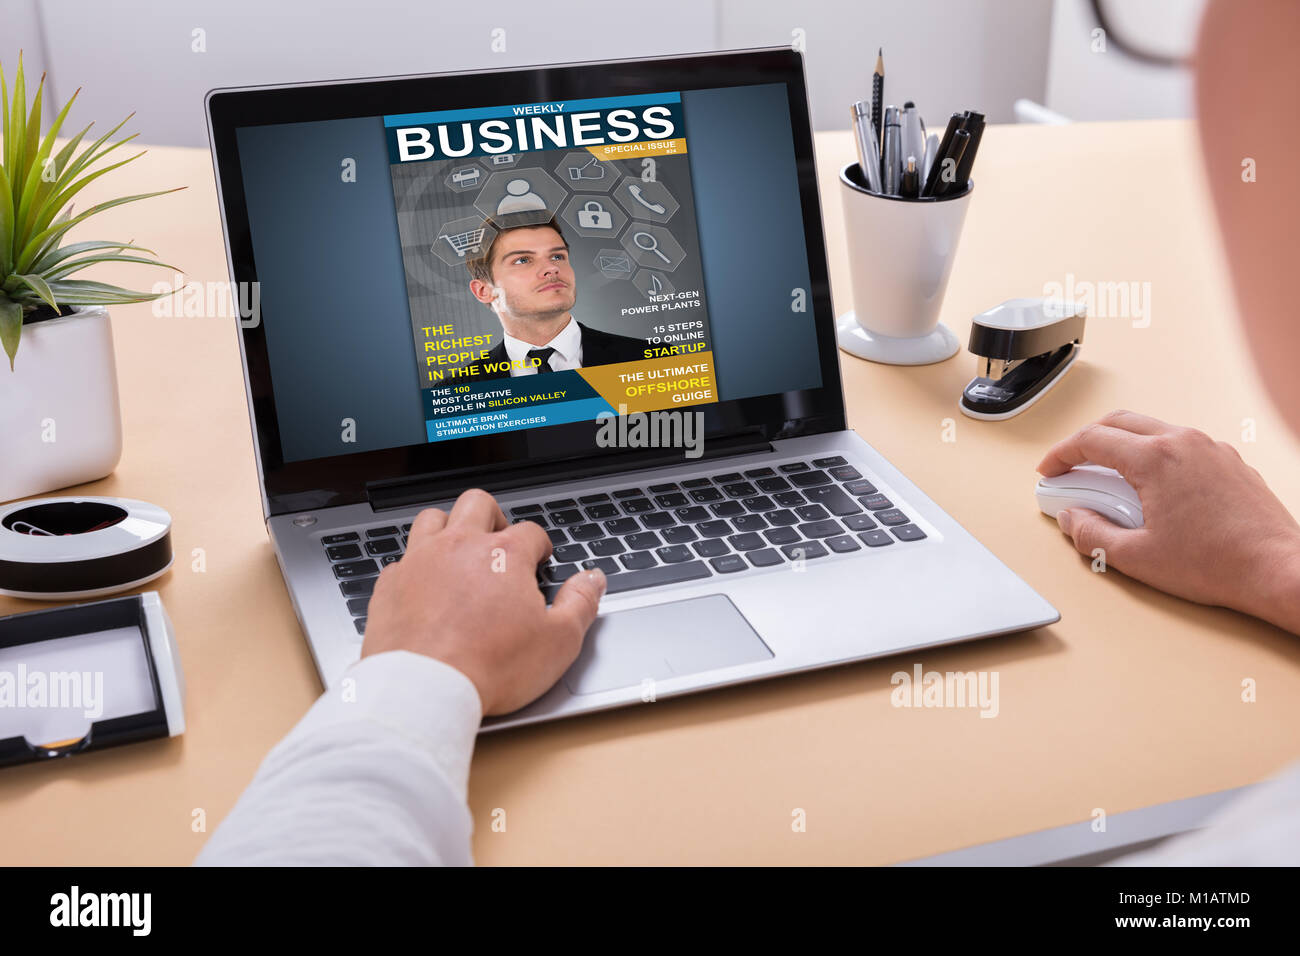 Businessperson Looking At Business Magazine On Laptop At Office Desk Stock Photo